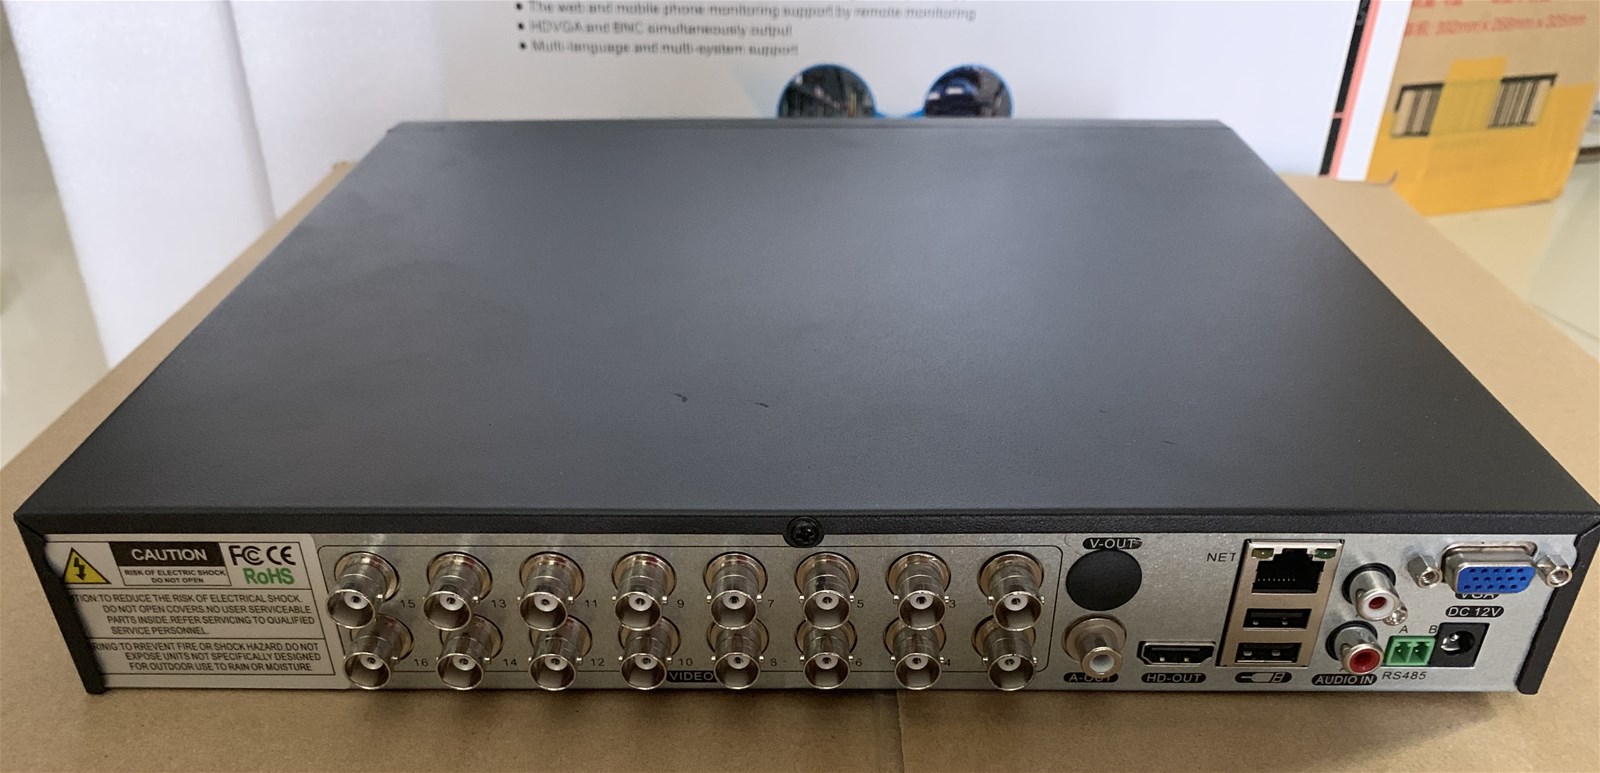 16ch 1080P AHDCVITVIIPAnalog 5 in one DVR with two HDD slots and 2ch audio input